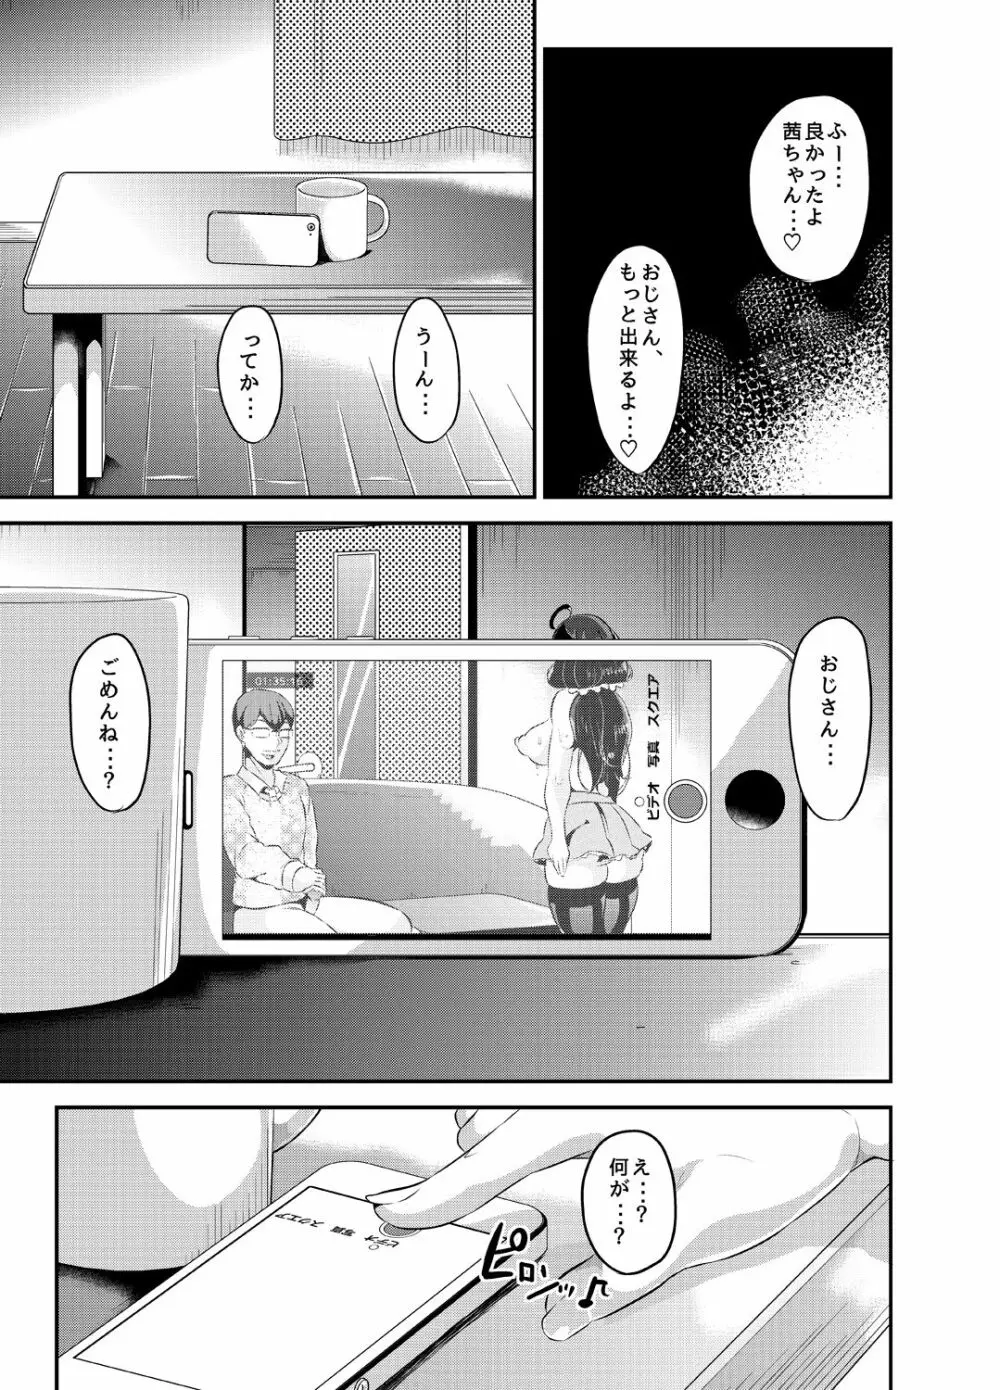 好き好き好き好き好き好き好き好き ver.4 - page22